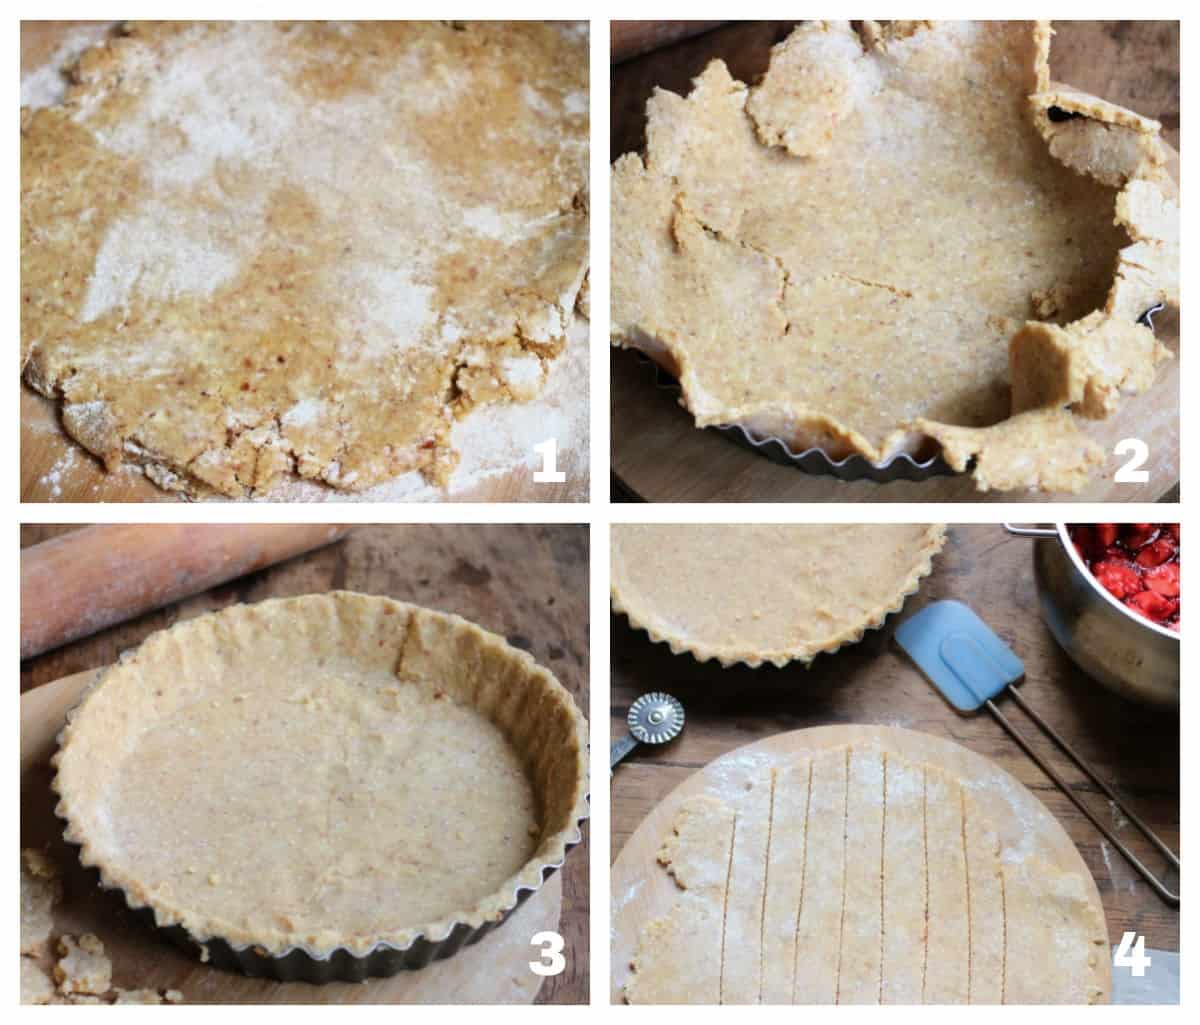 Four image collage of pie rolling and pan lining process.